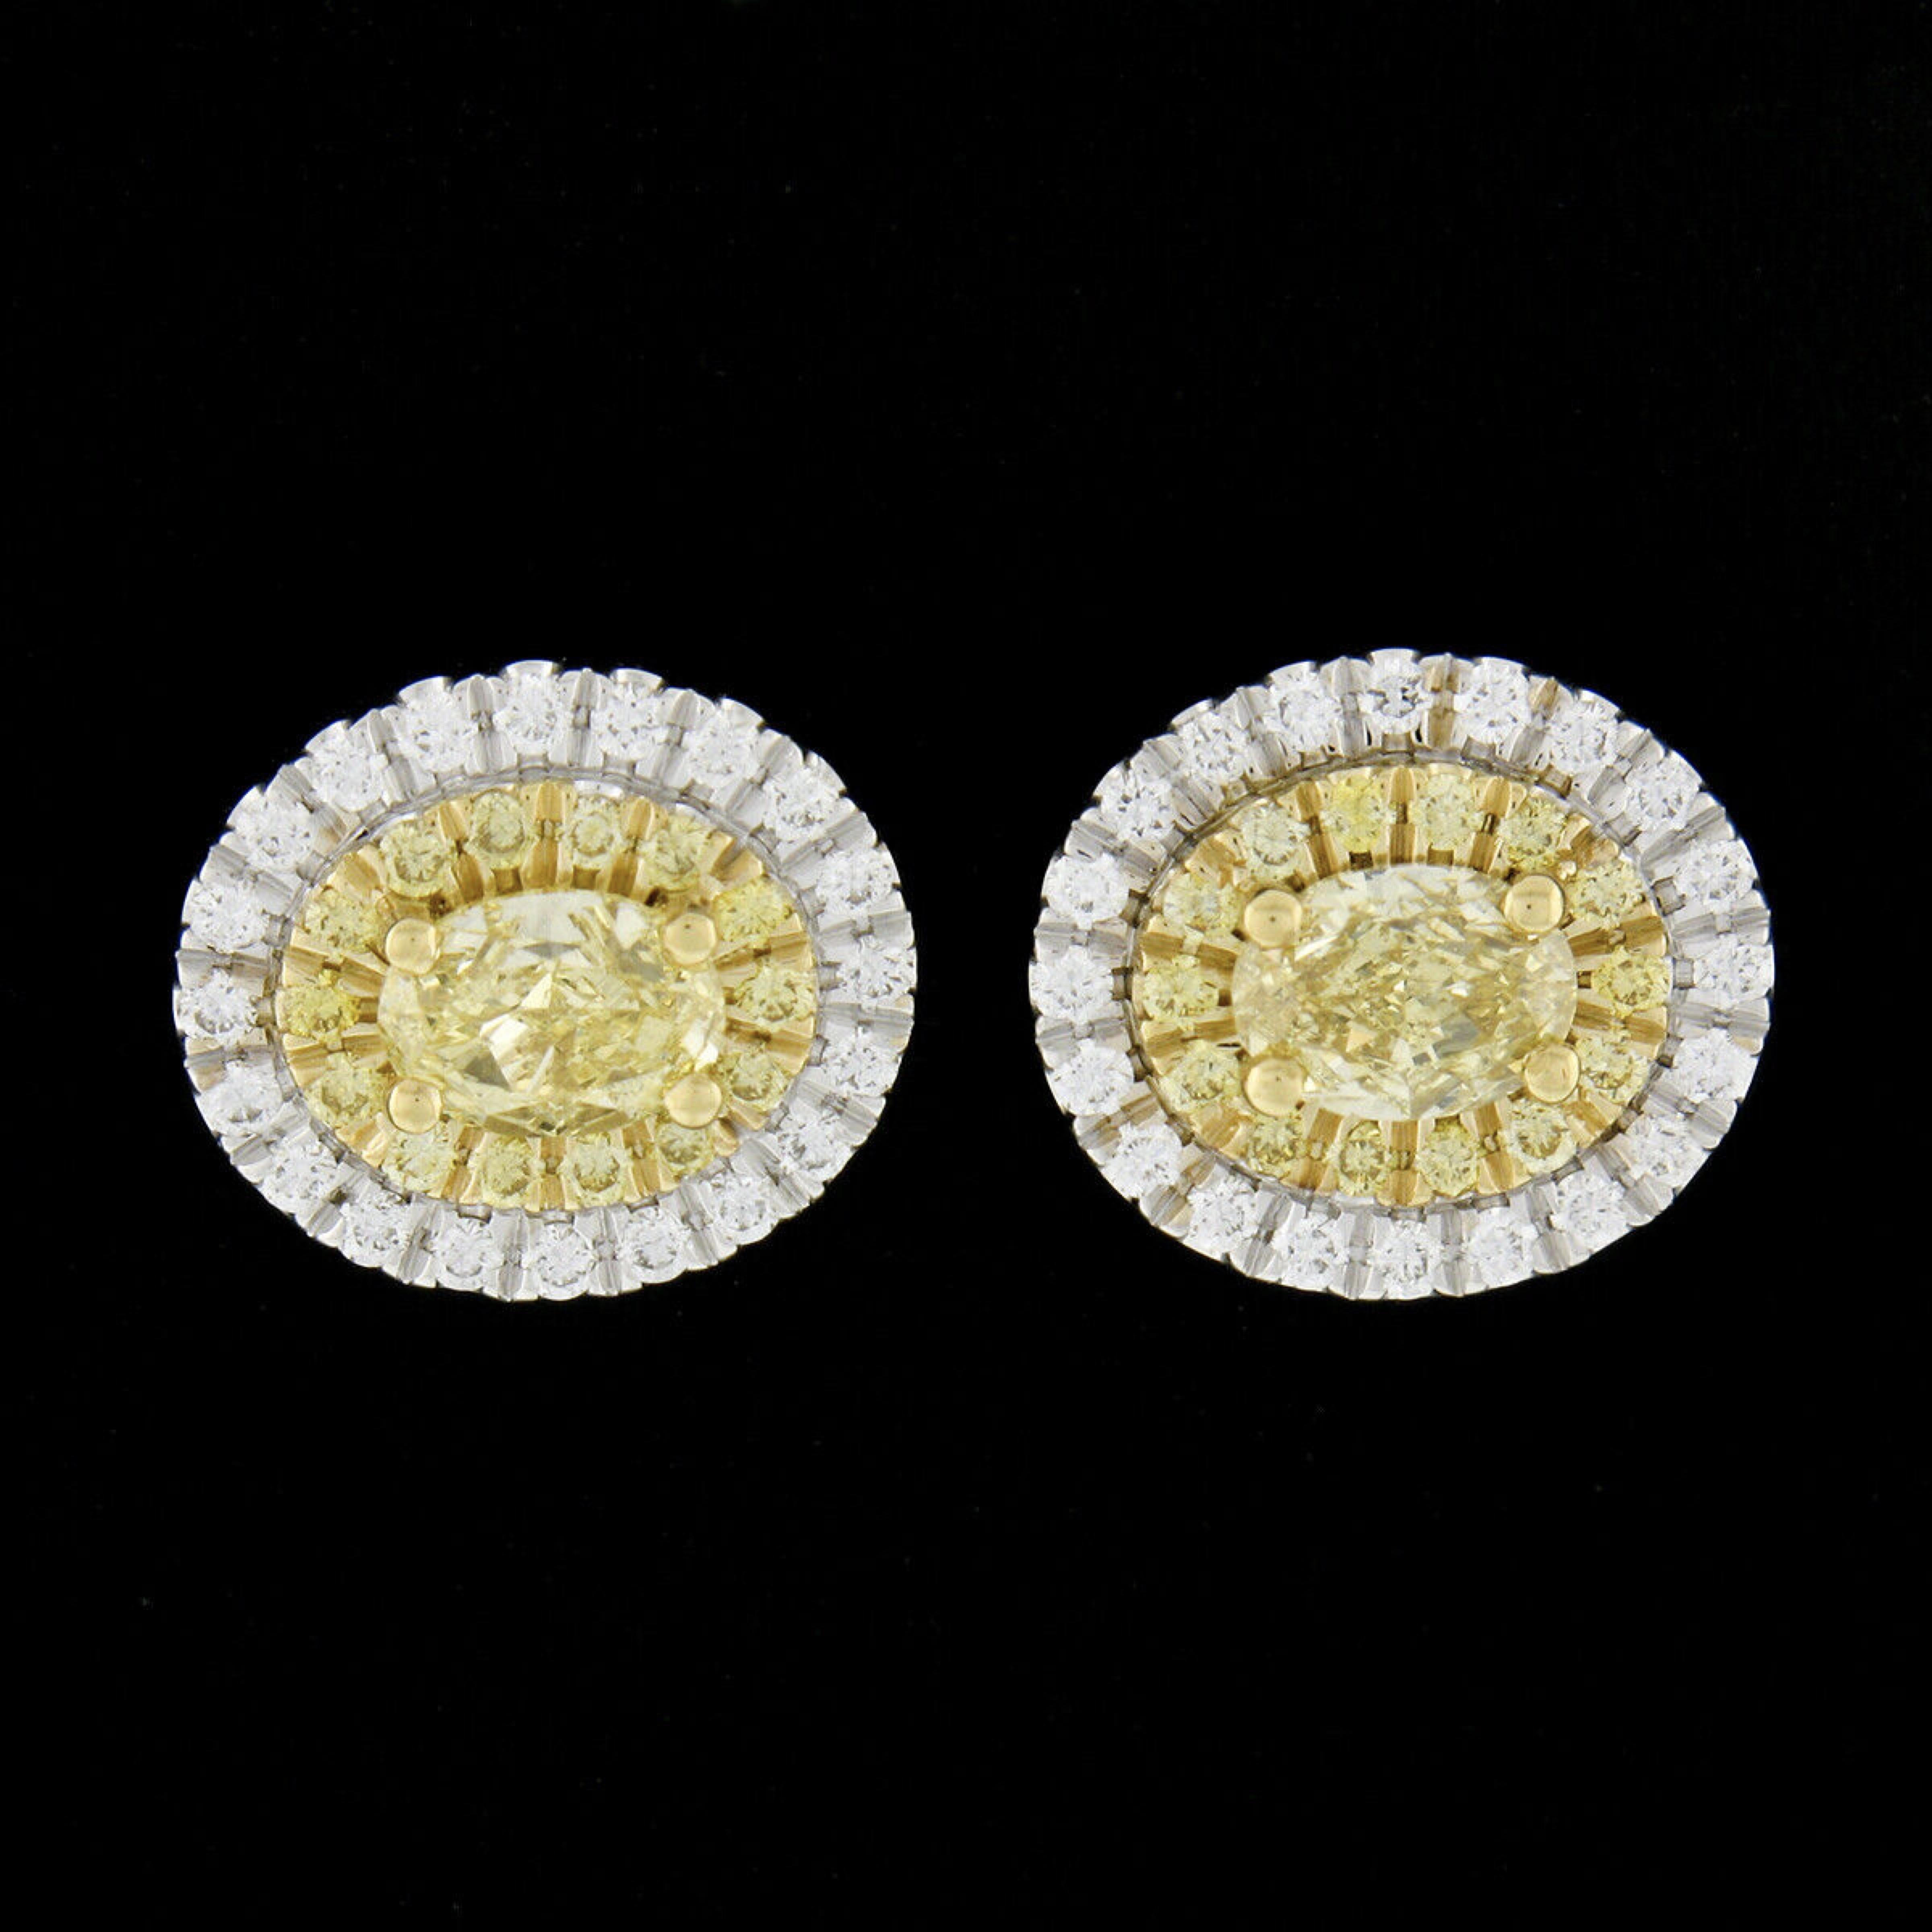 This fiery and lively pair of diamond oval stud earrings is newly crafted in solid 18k white gold and features an oval brilliant cut fancy yellow diamond neatly prong set in 18k yellow gold at the center of a brilliant dual halo design. The two